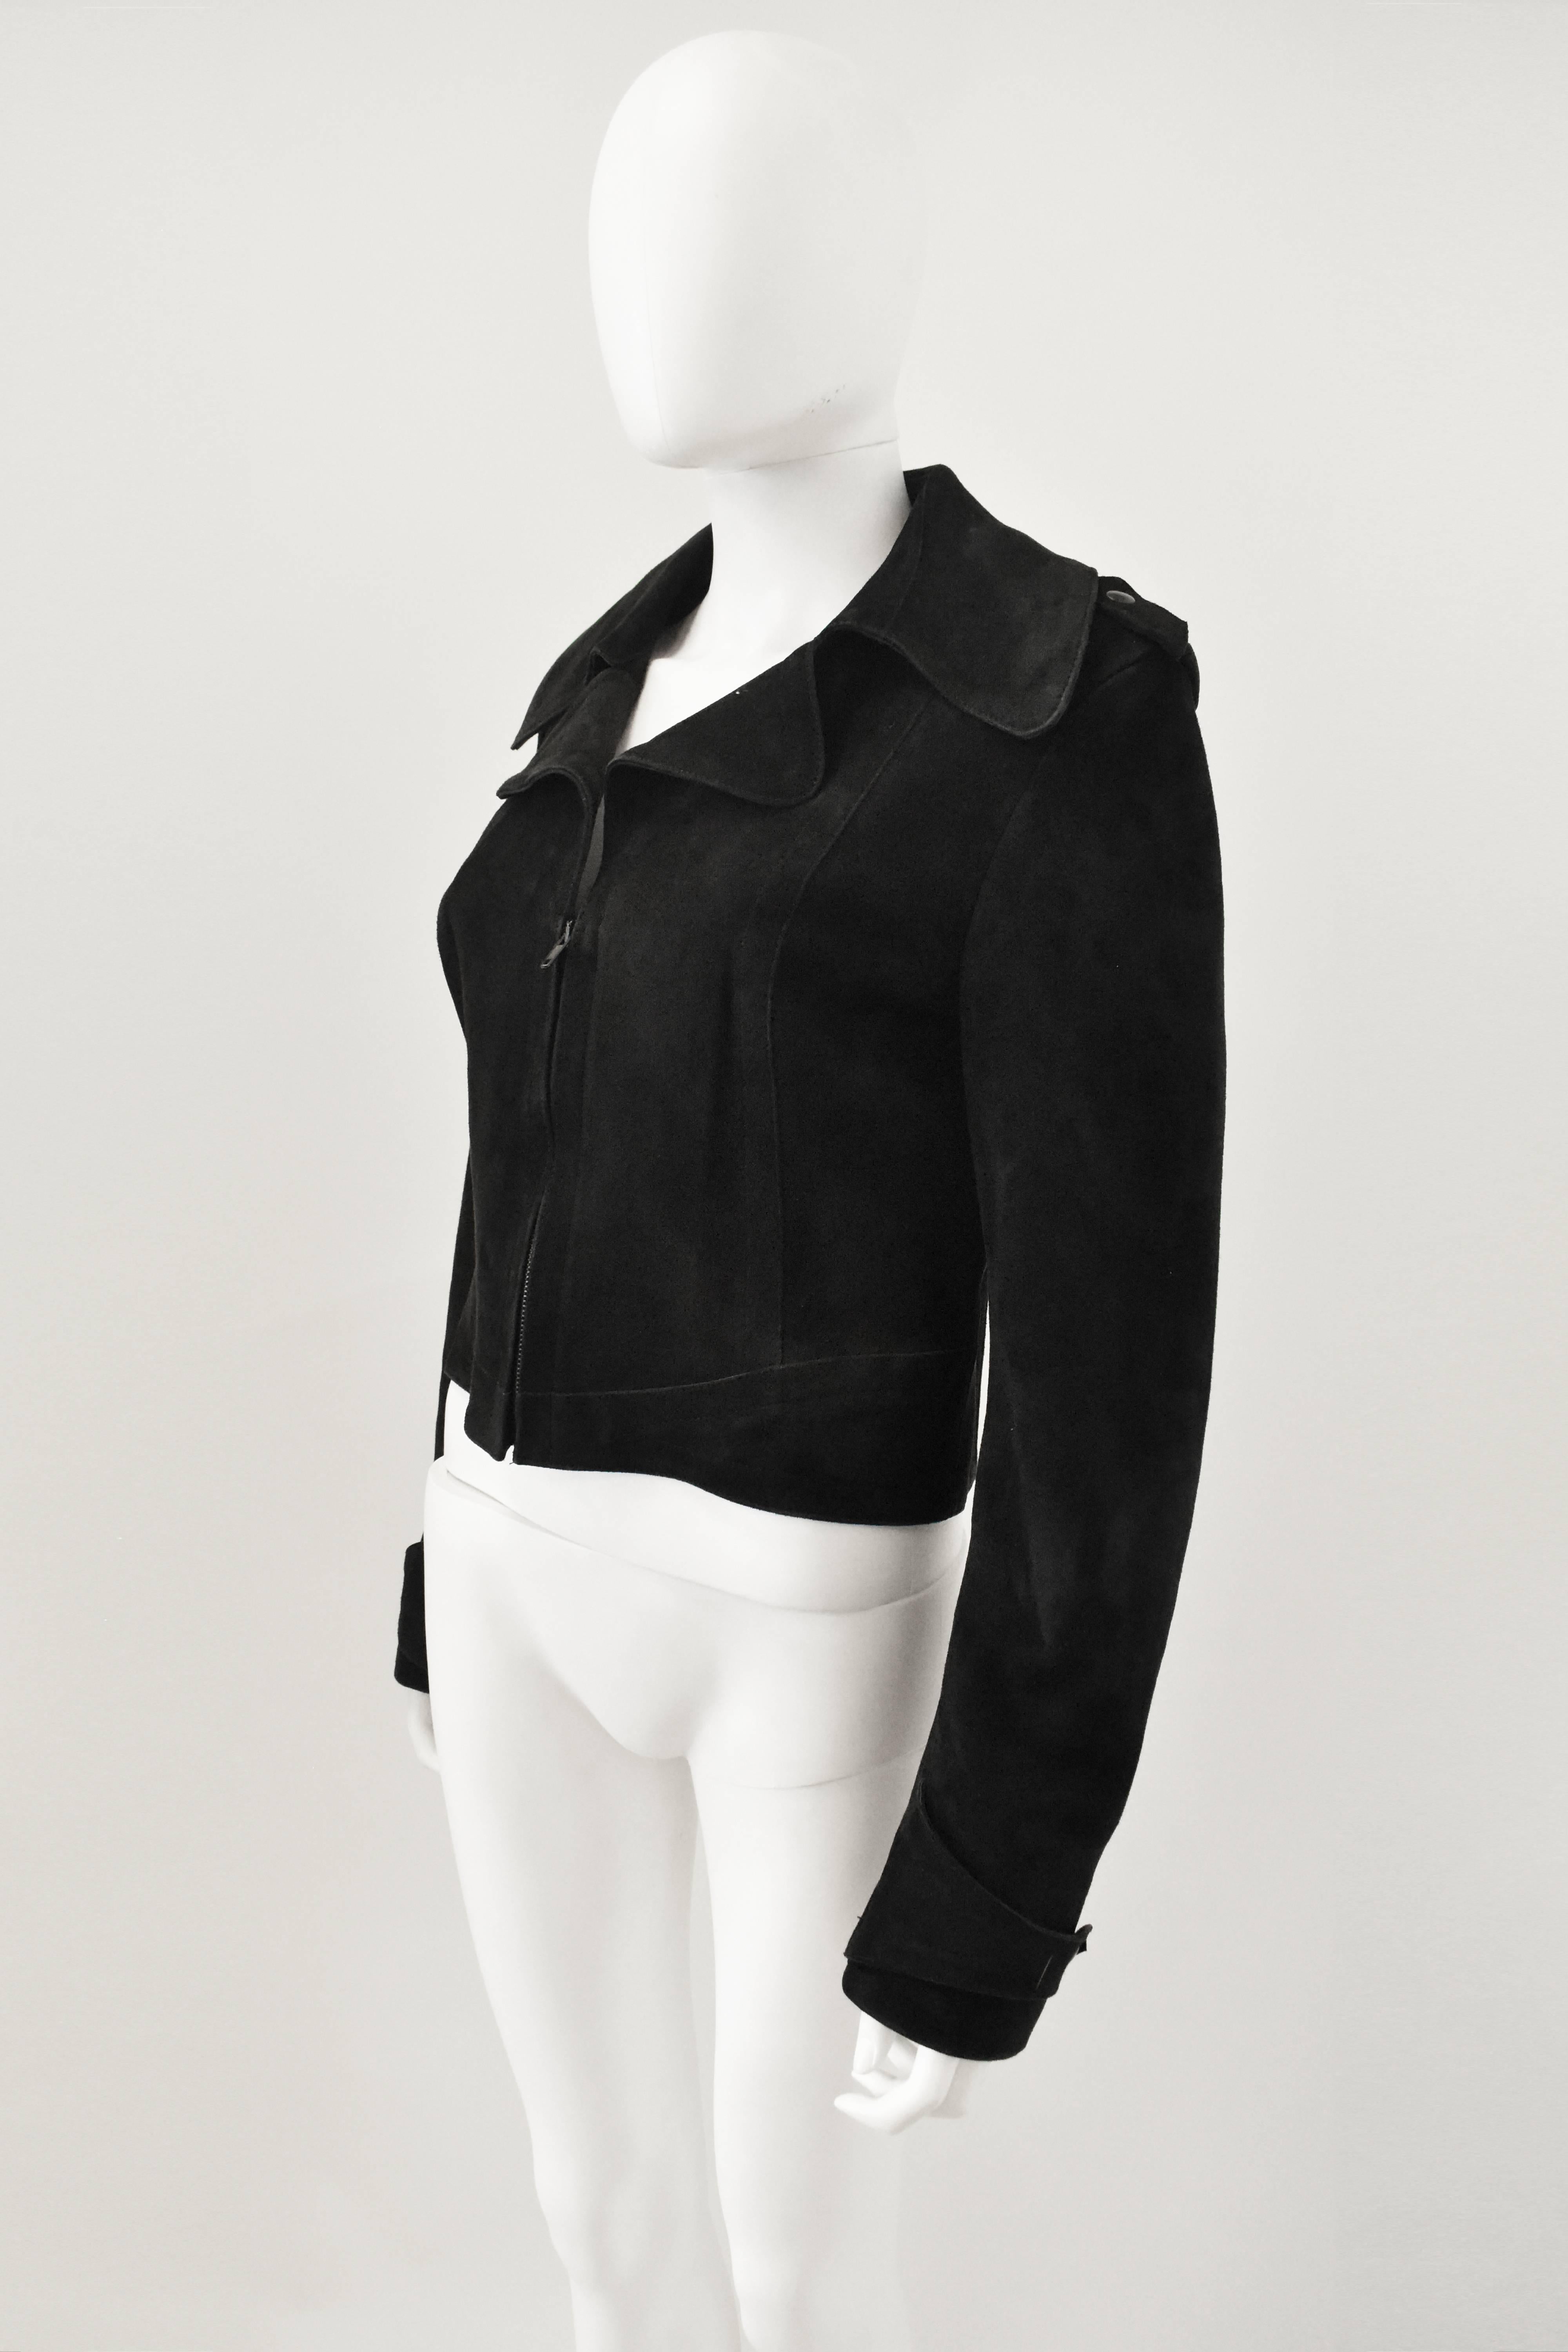 A black suede cropped biker jacket from Maison Martin Margiela’s REPLICA line. The jacket is based on a Parisian Biker Jacket from 1968. It has a cropped, boxy shape with a central zip, large collar and stitching around the waist. It also features